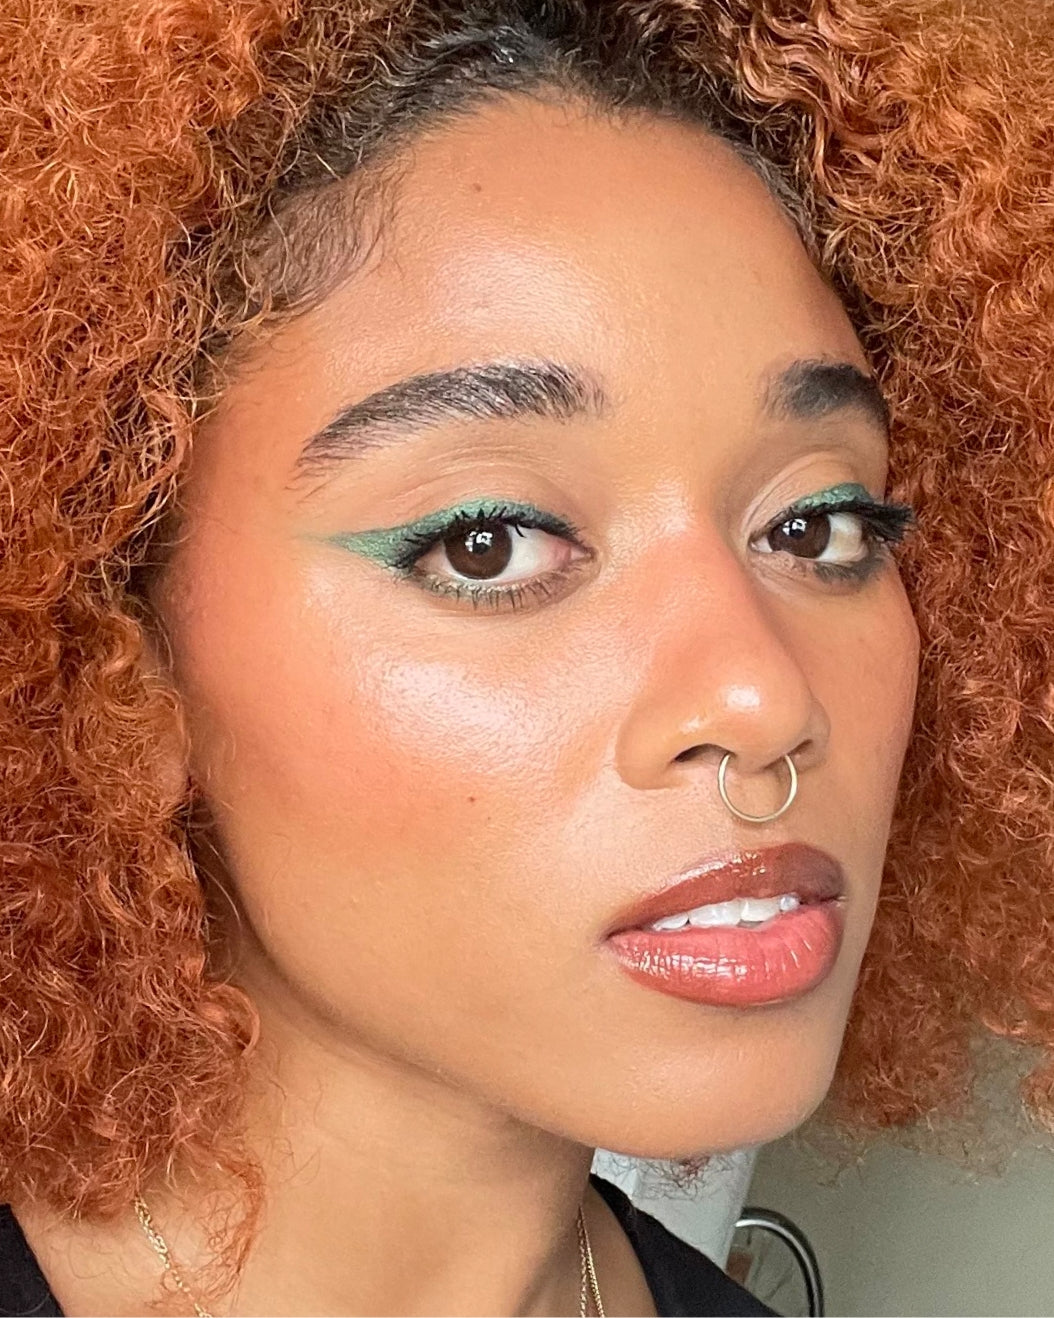 7 Graphic Liner Looks to Elevate Your Eye Makeup Game